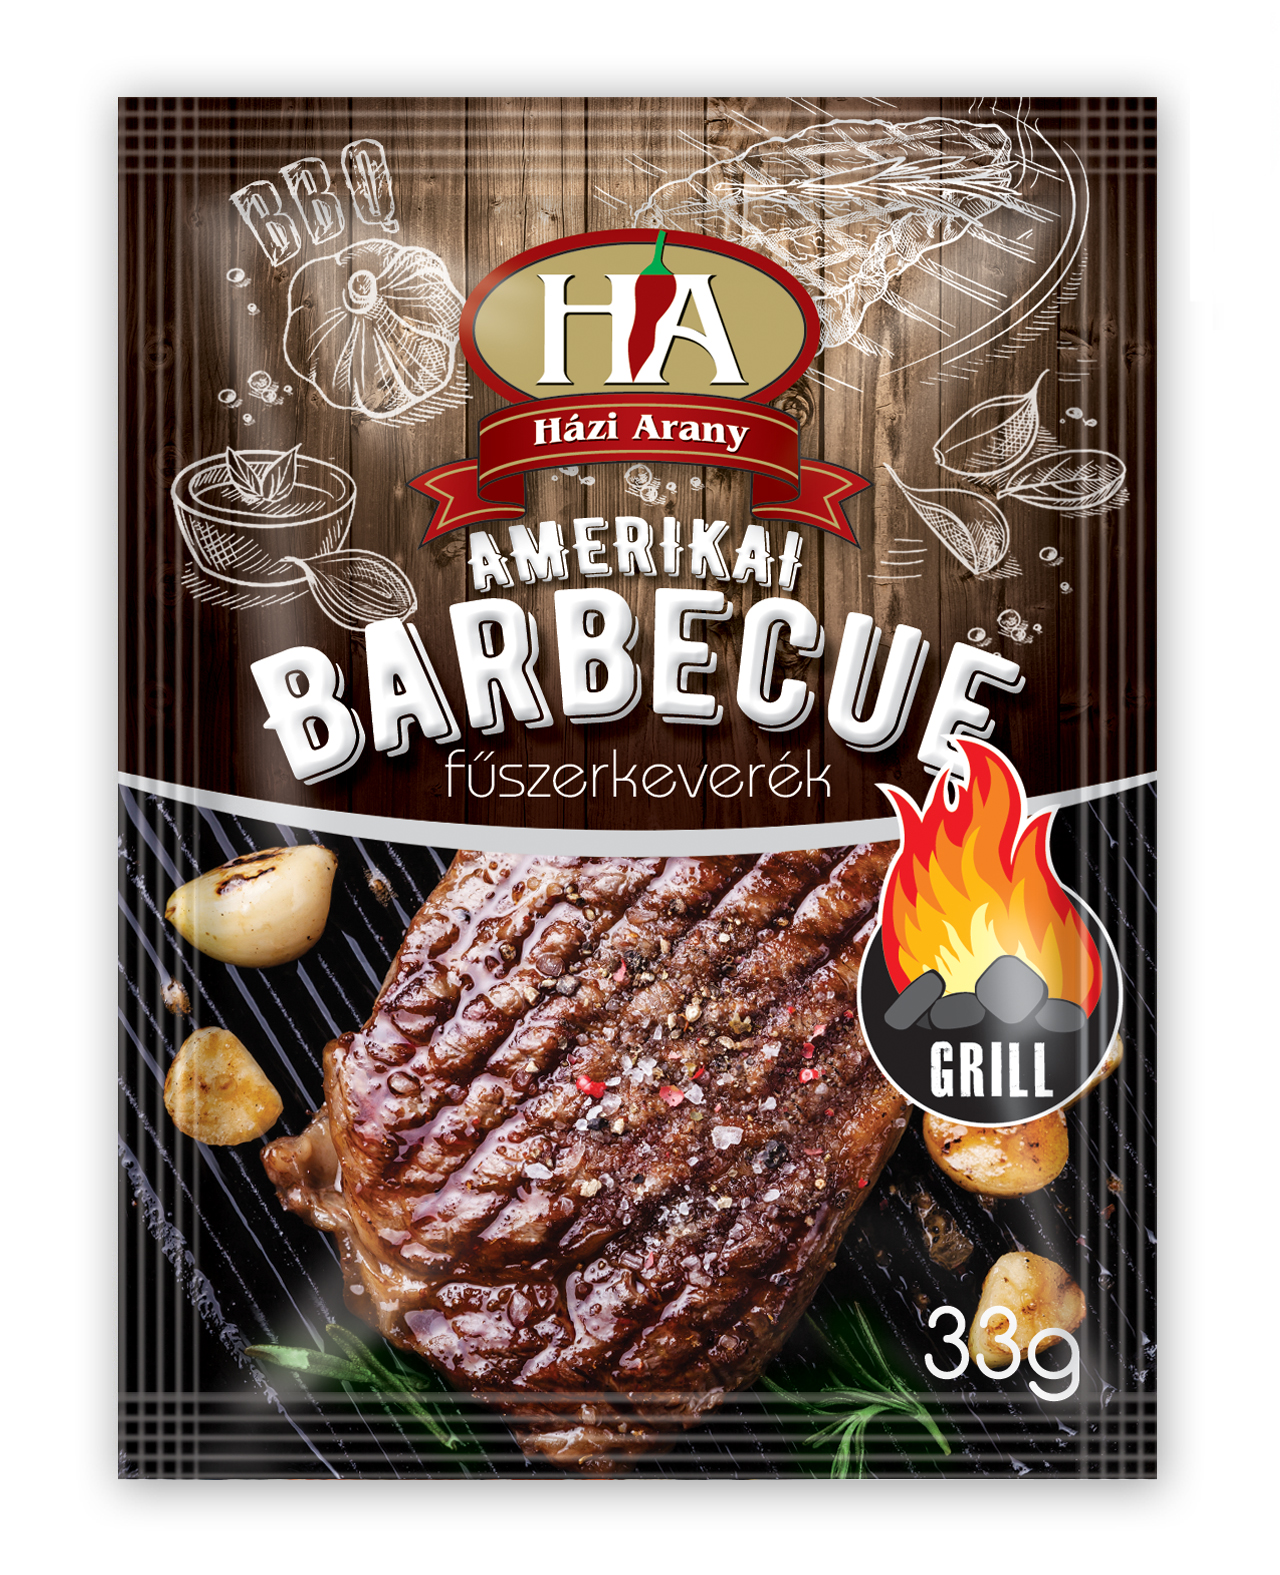 Babecue grill - 33g